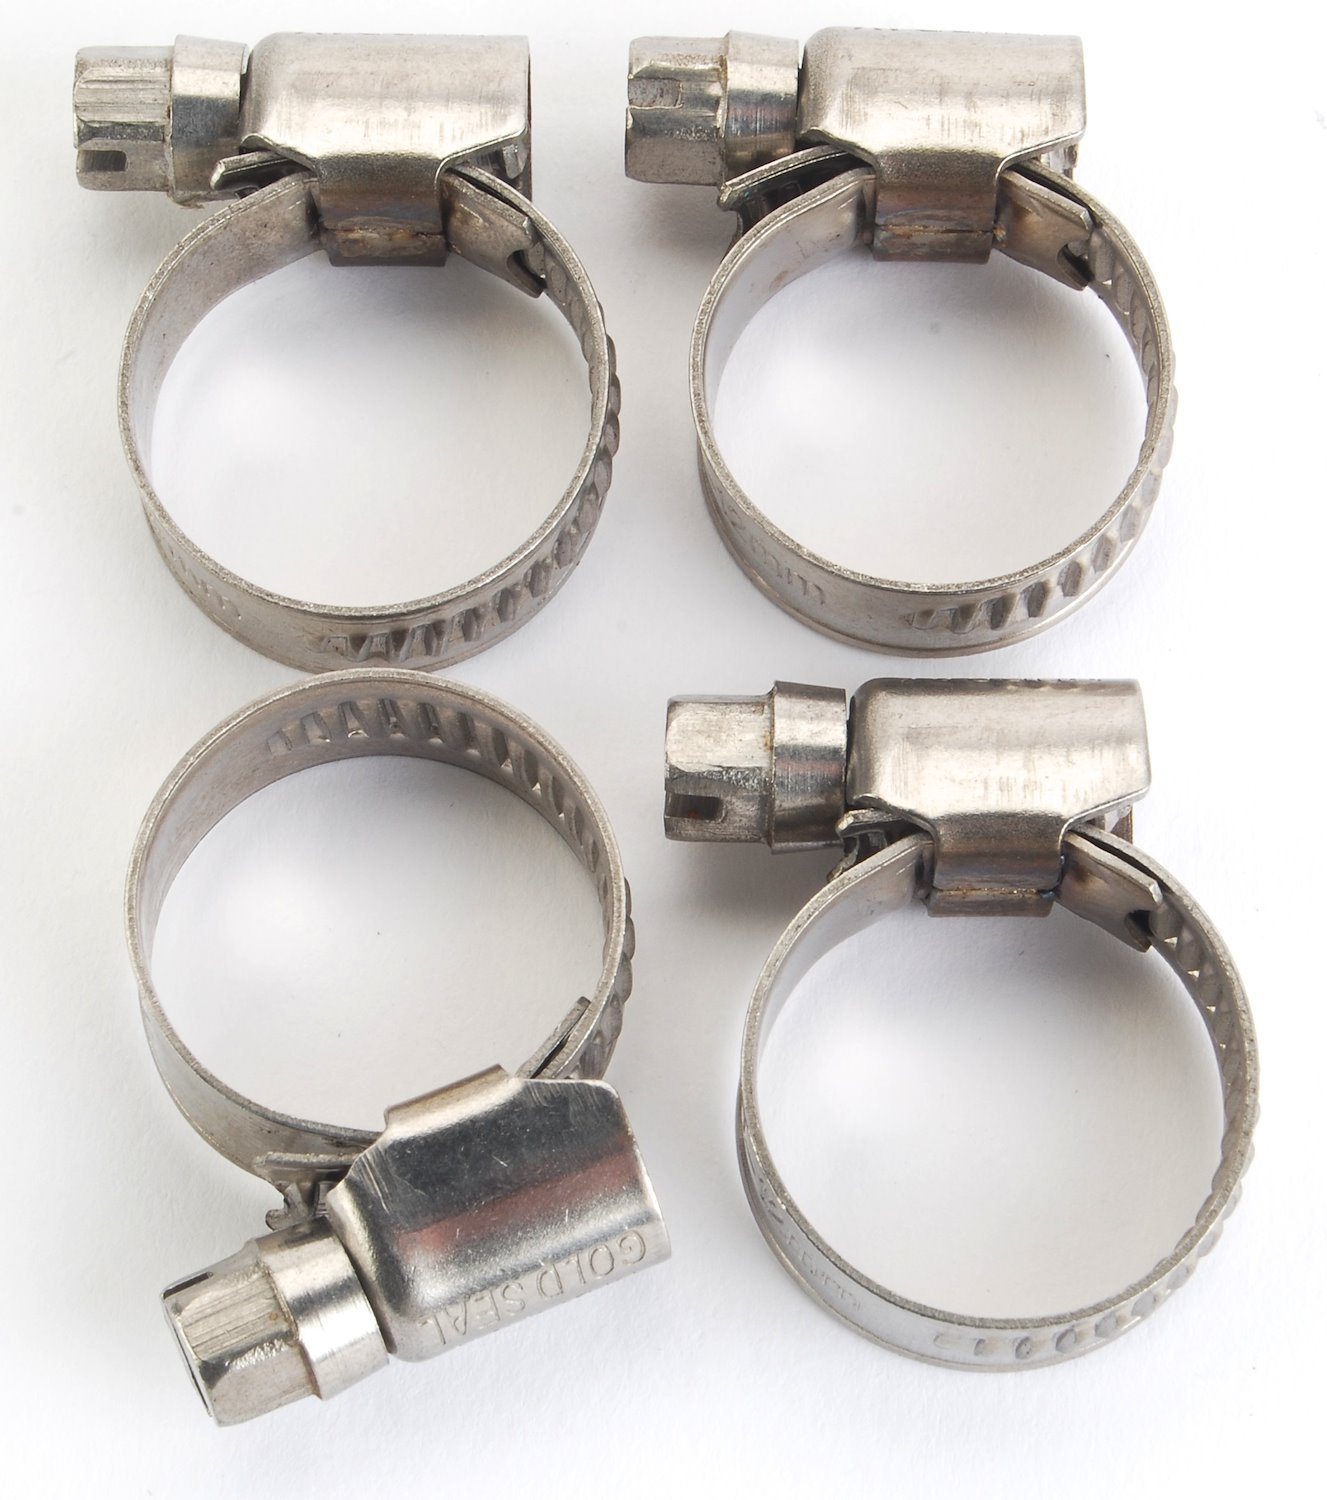 Stainless Steel Hose Clamps 1/2 in. to 7/8